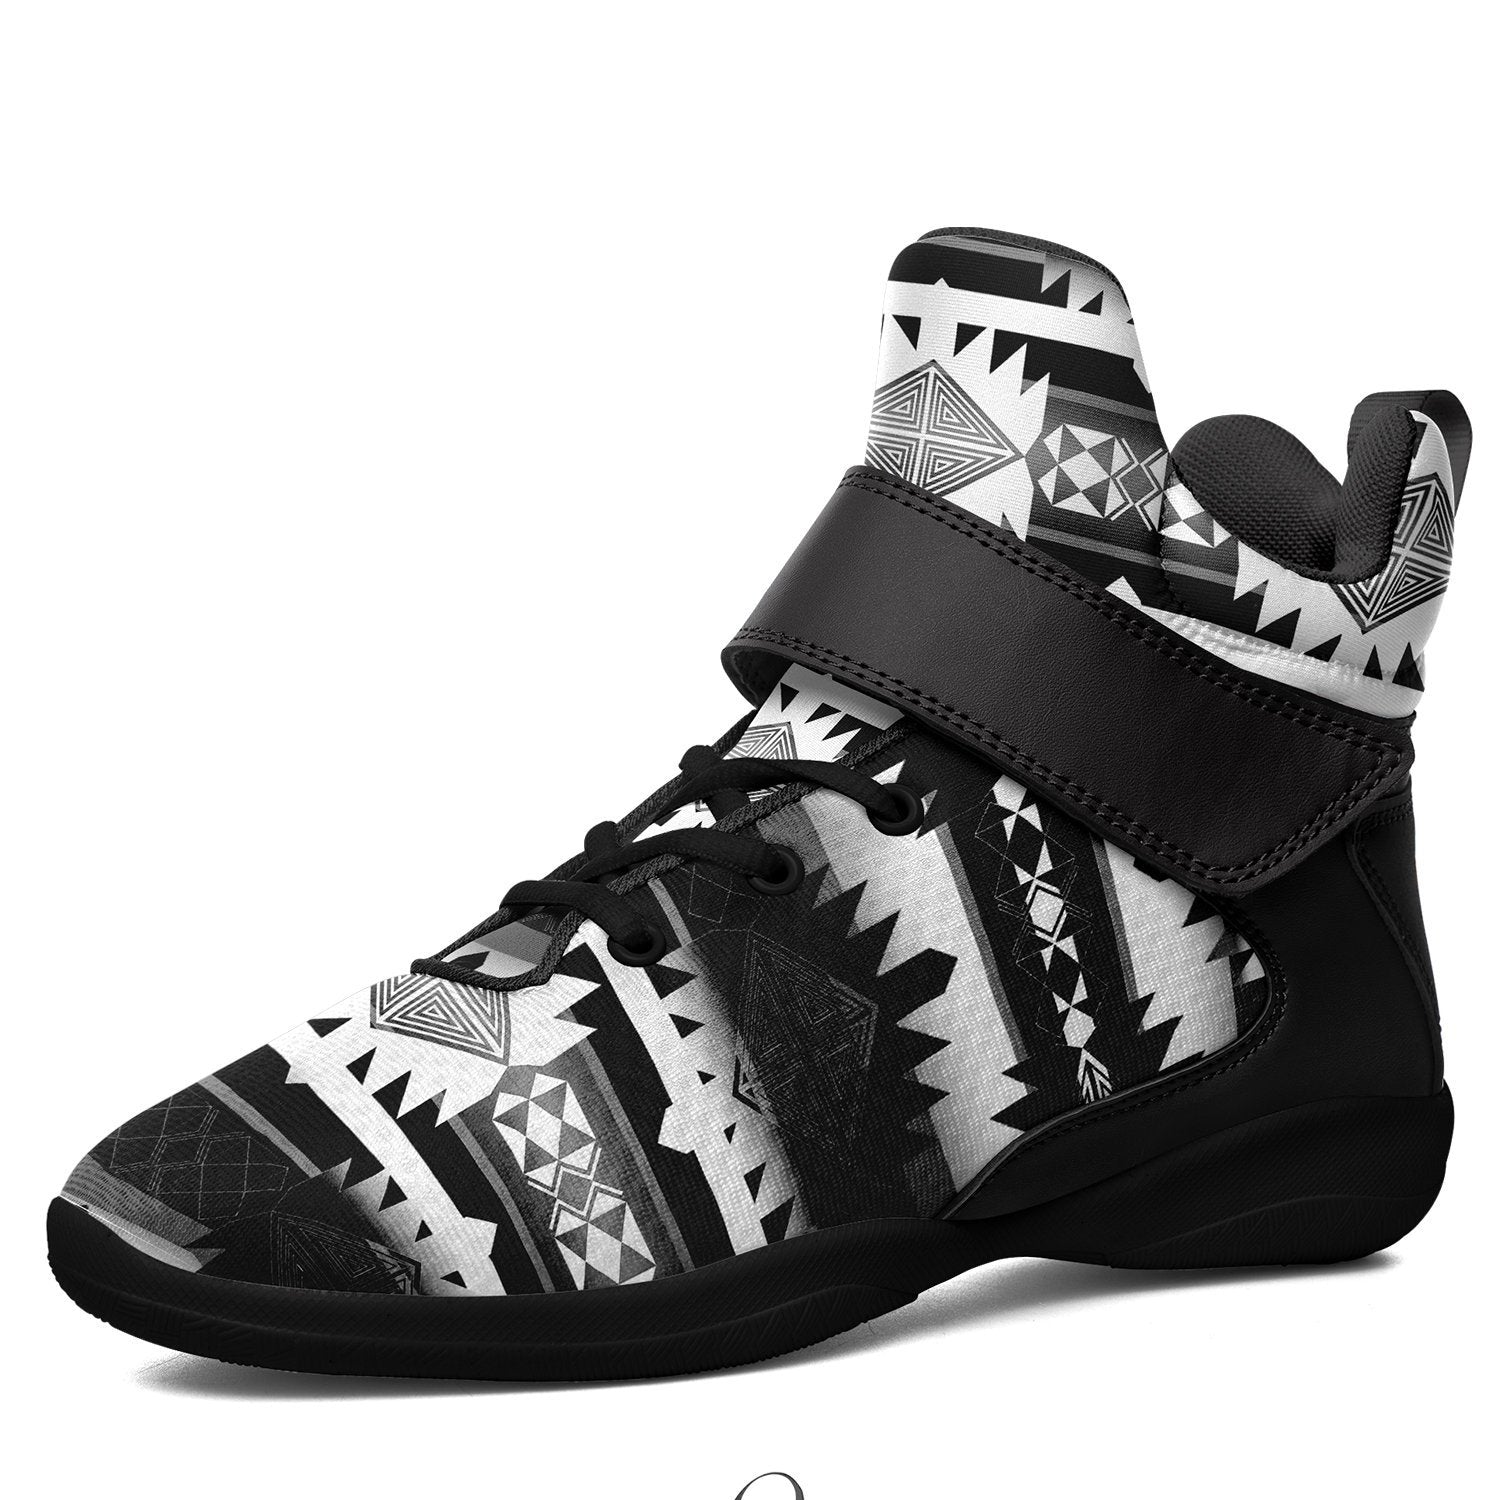 Okotoks Black and White Ipottaa Basketball / Sport High Top Shoes - Black Sole 49 Dzine US Men 7 / EUR 40 Black Sole with Black Strap 